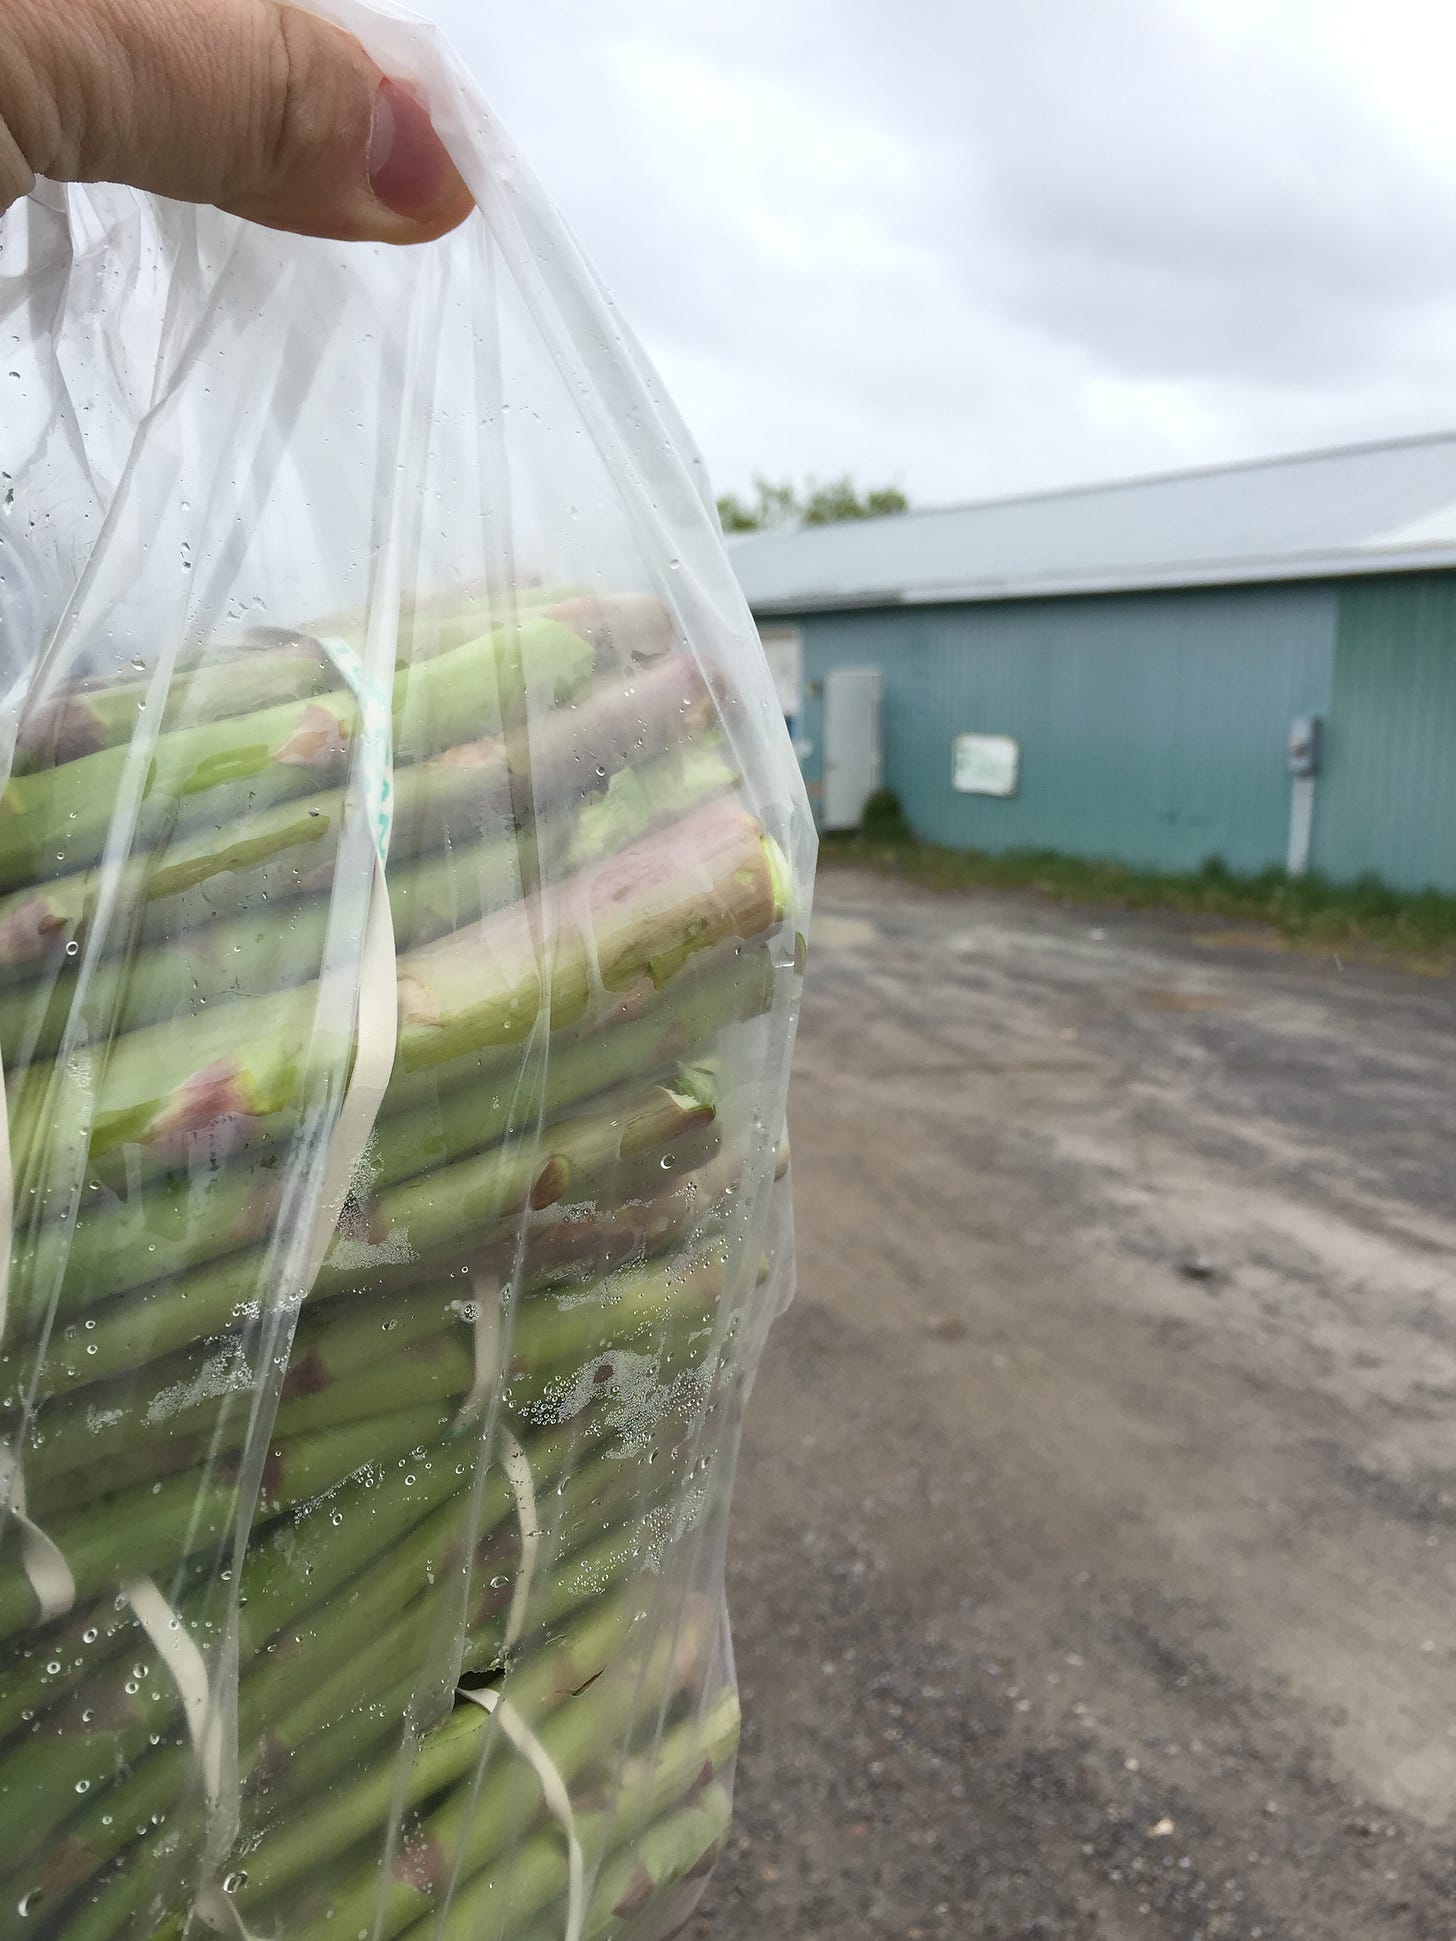 A man's hand holding a large bag full of asparagus. In the background there is a farm building.